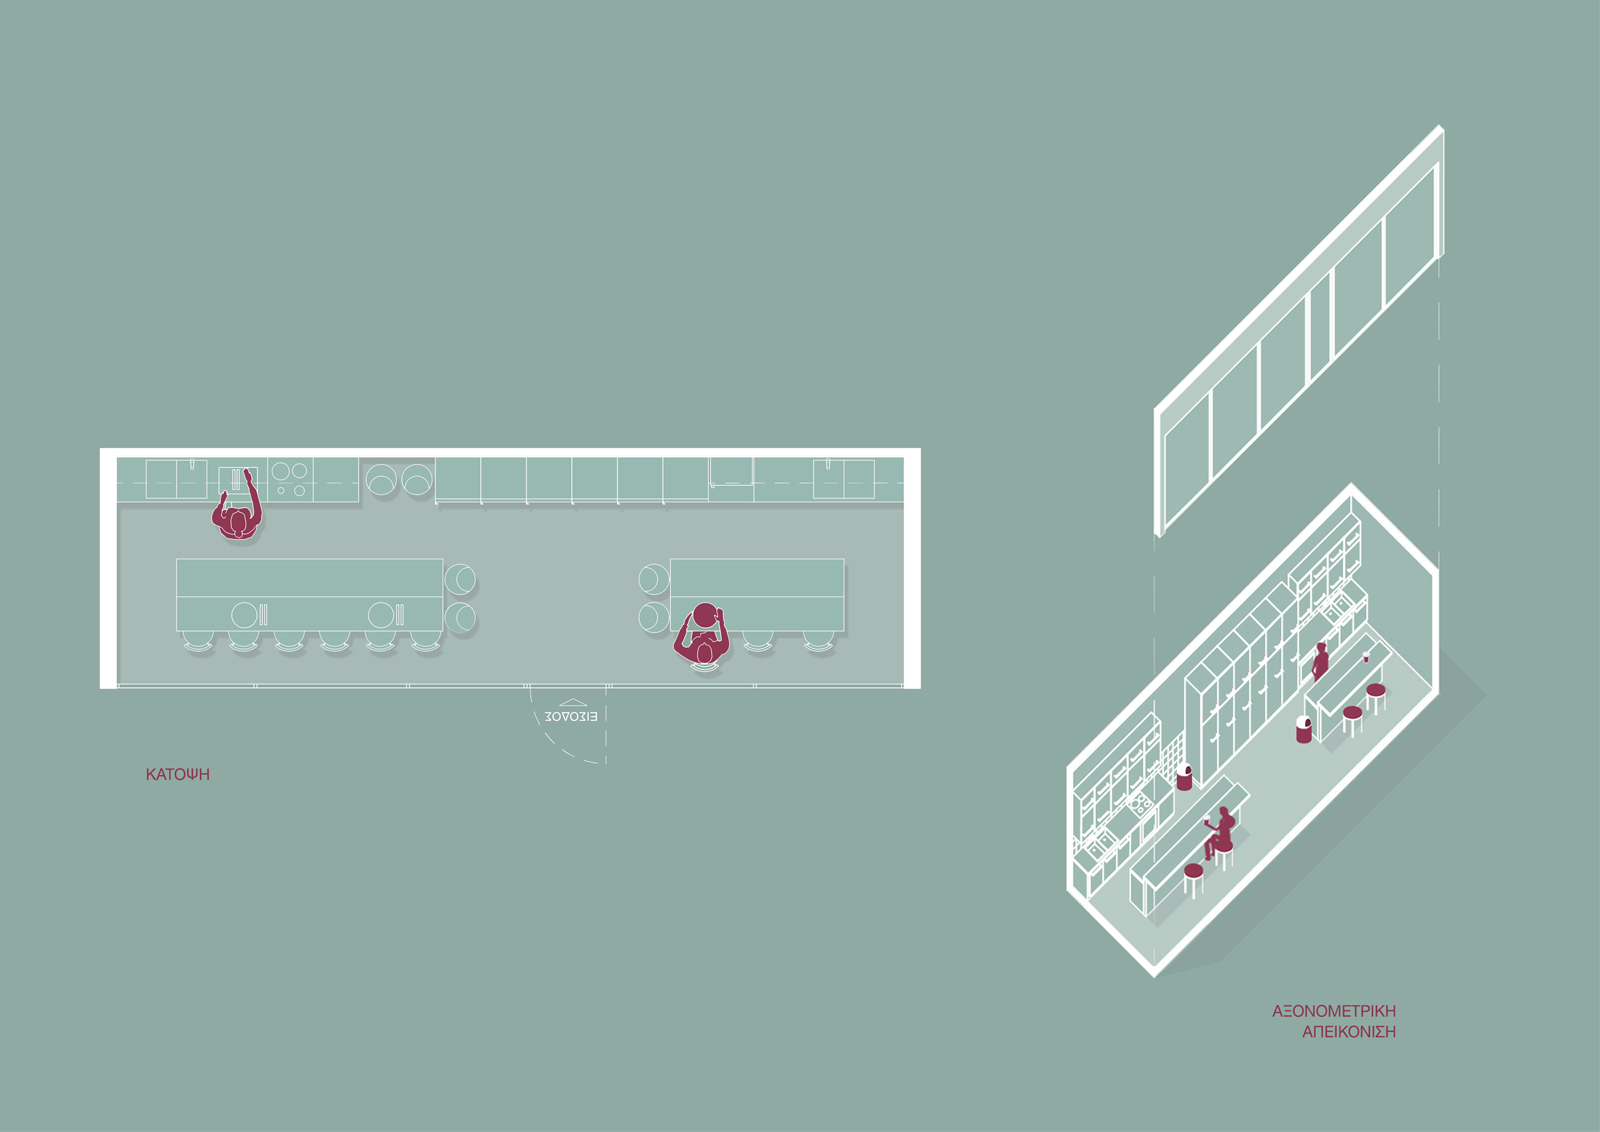 Archisearch YoUth Campus : Multifunctional Hub | Diploma thesis by Elli Koutsogianni & Patila Dimitra